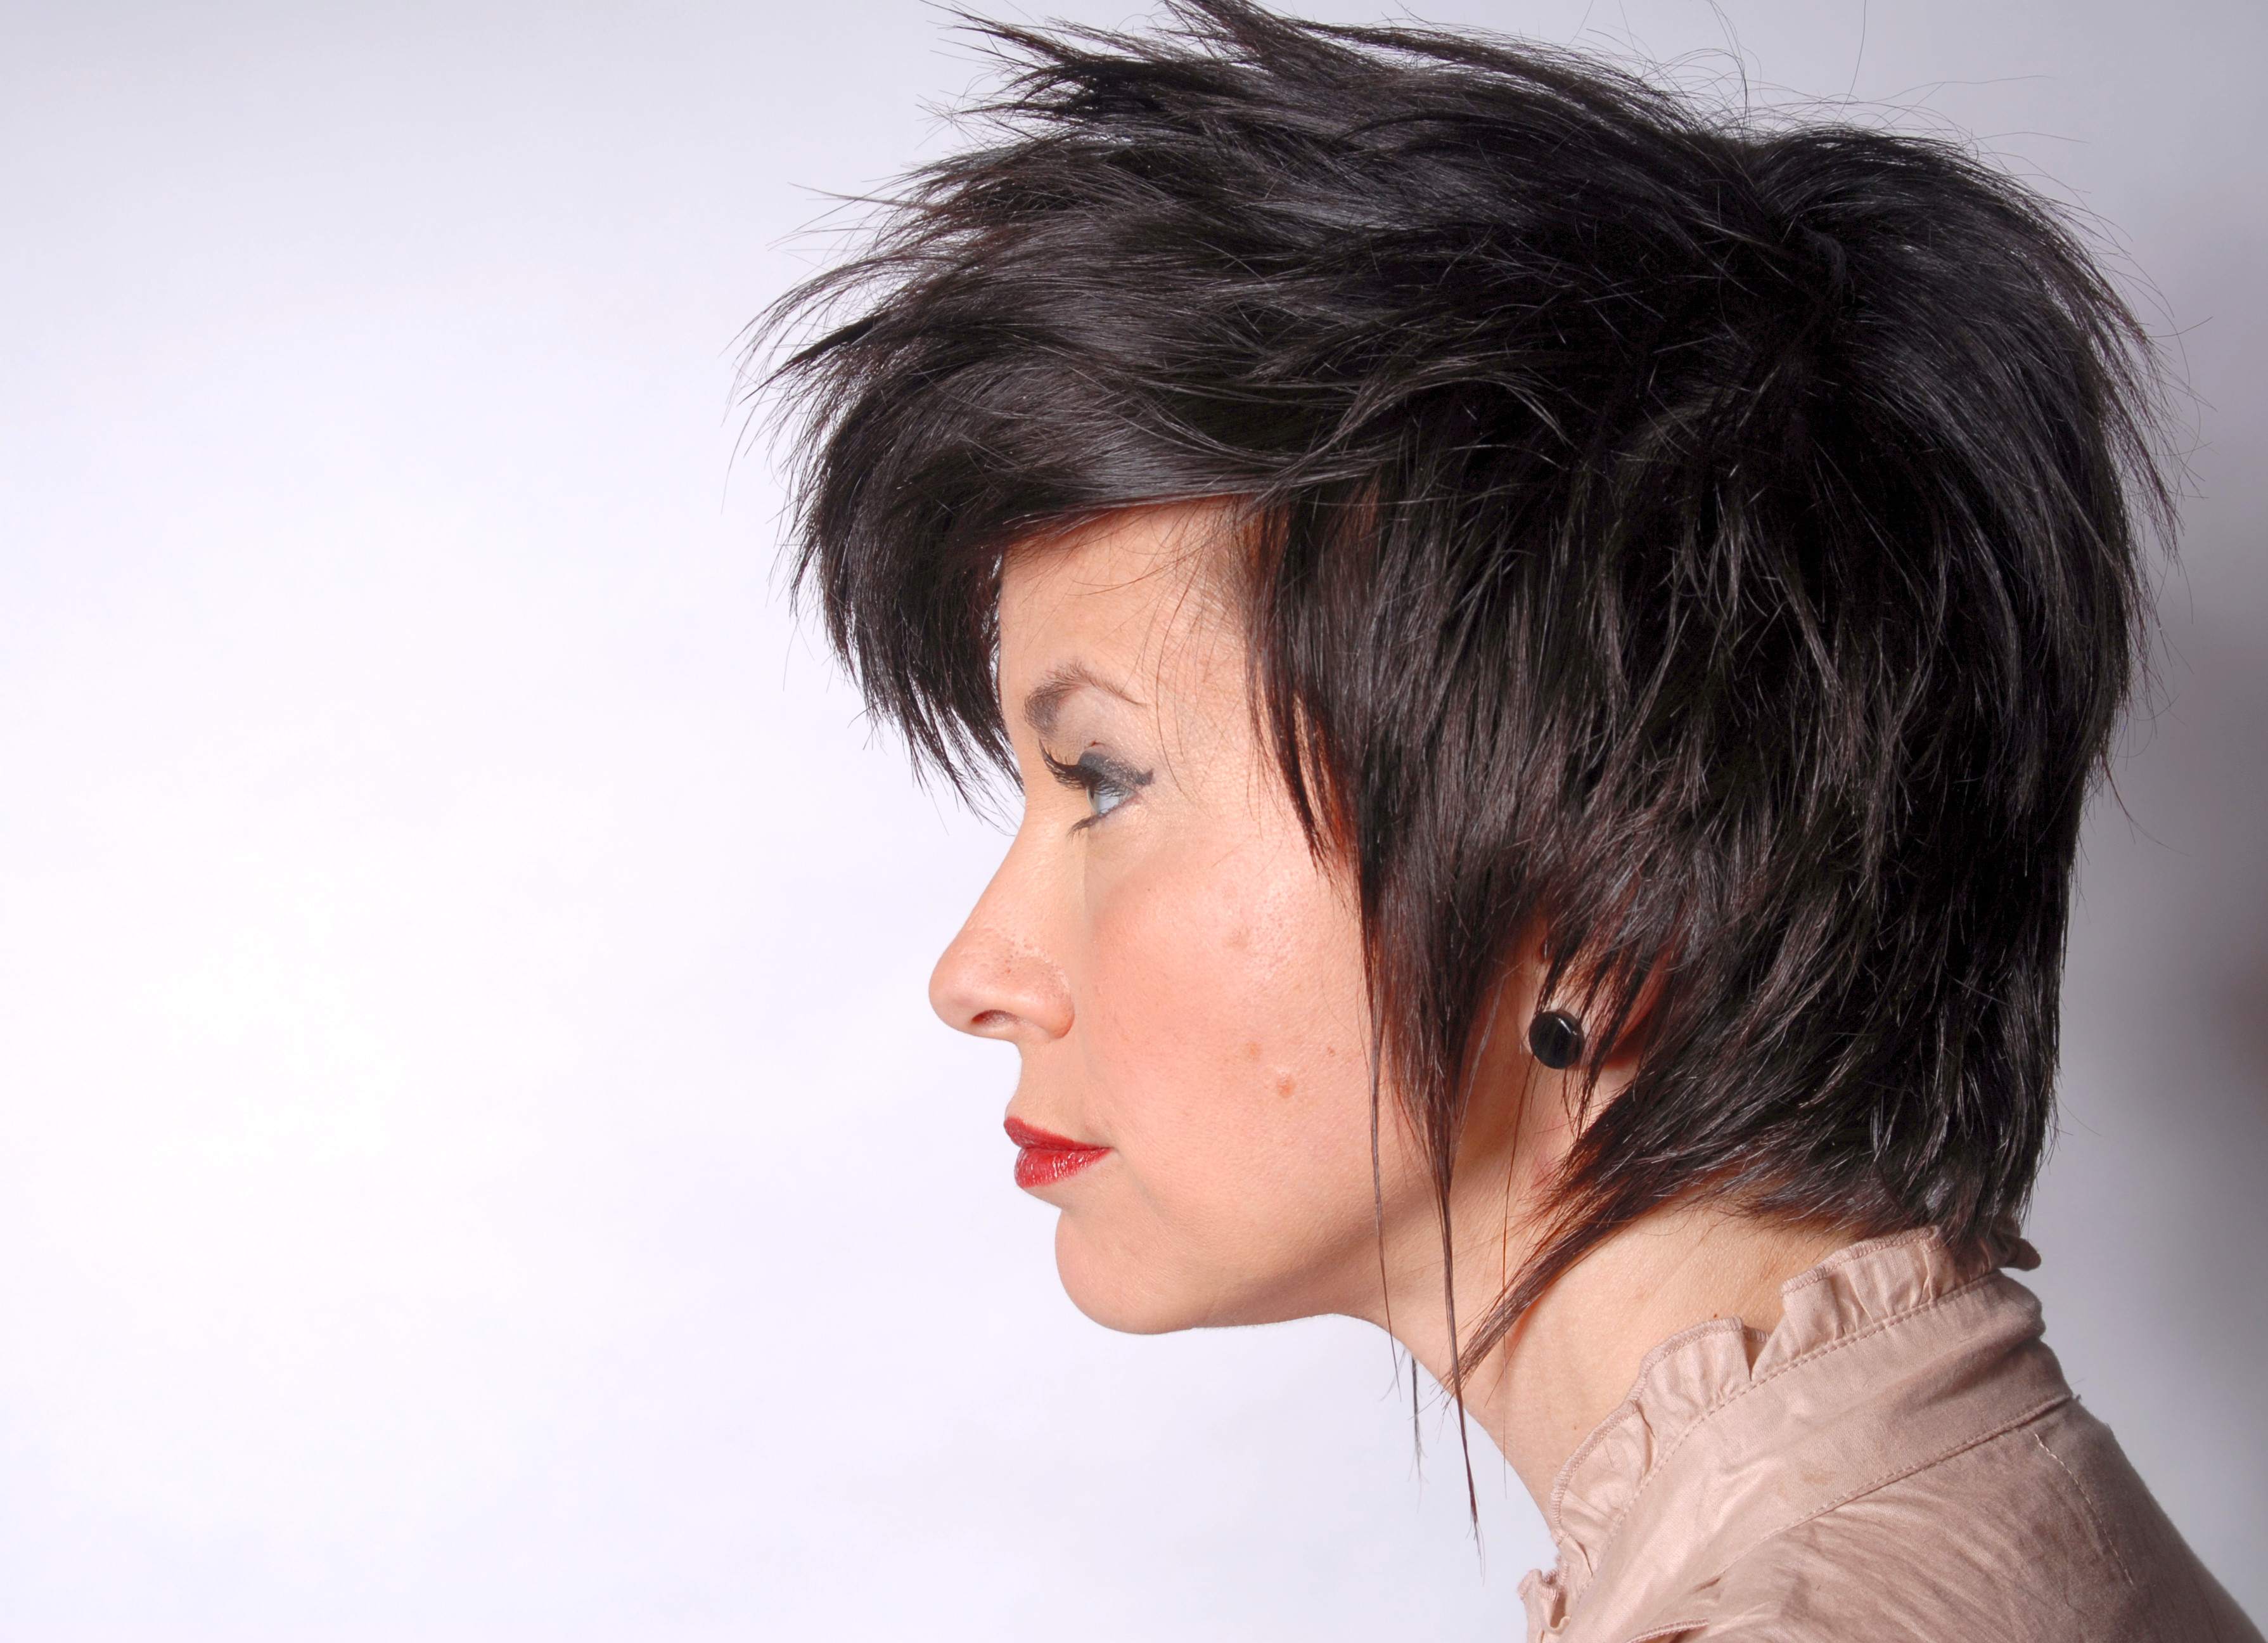 Short Hairstyles For Women Photo Of Short Edgy Cut By John